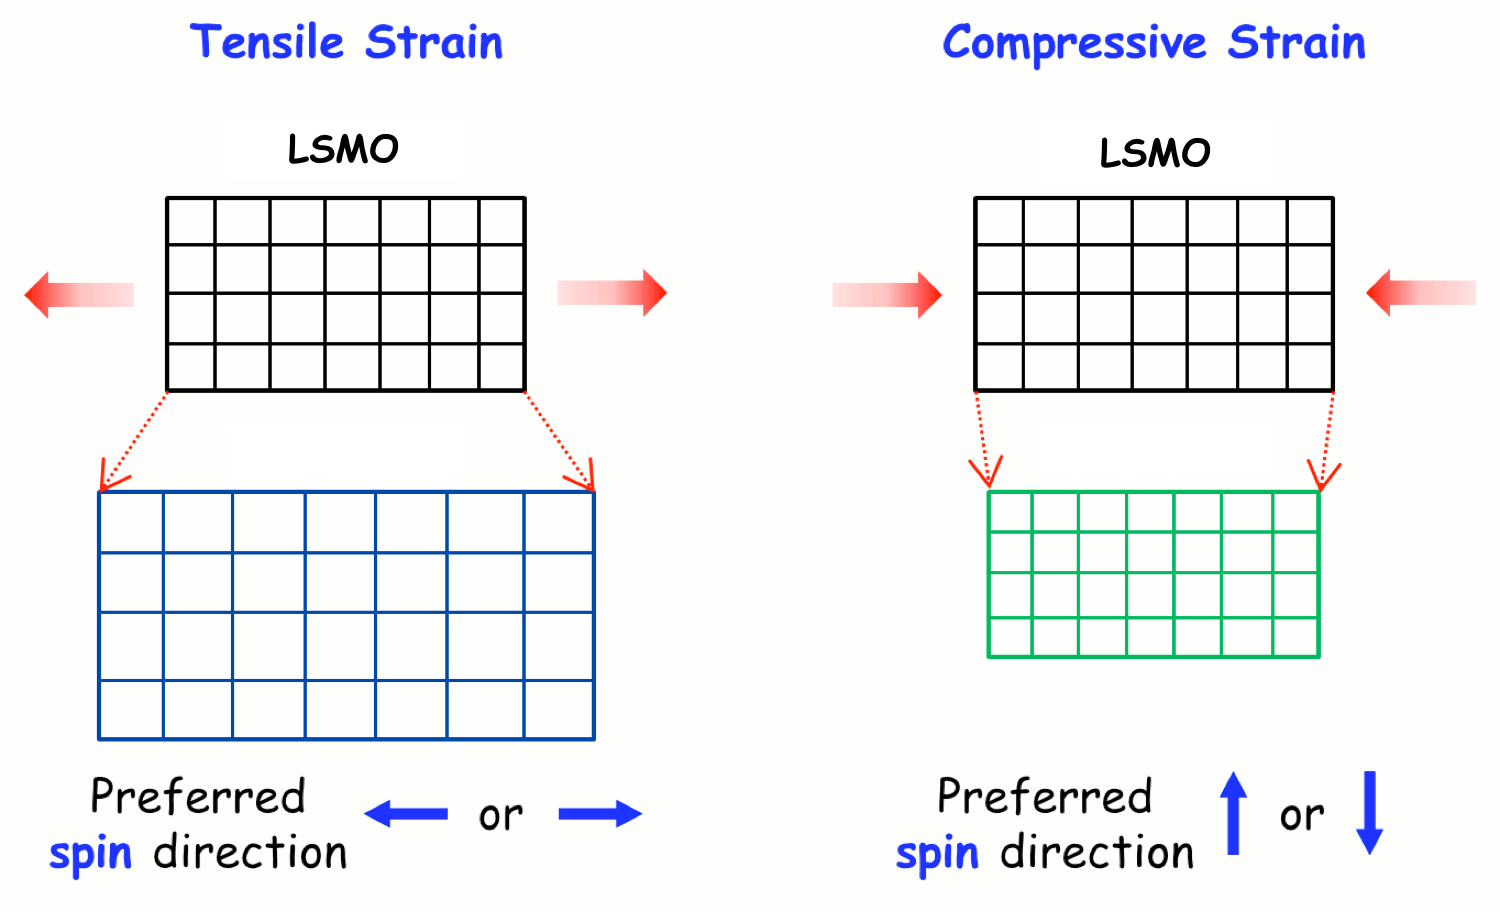 When LSMO is clamped together with a material with larger crystal size (e.g., SrTiO3), its crystals will stretch, creating a longer lateral axis and locking in 